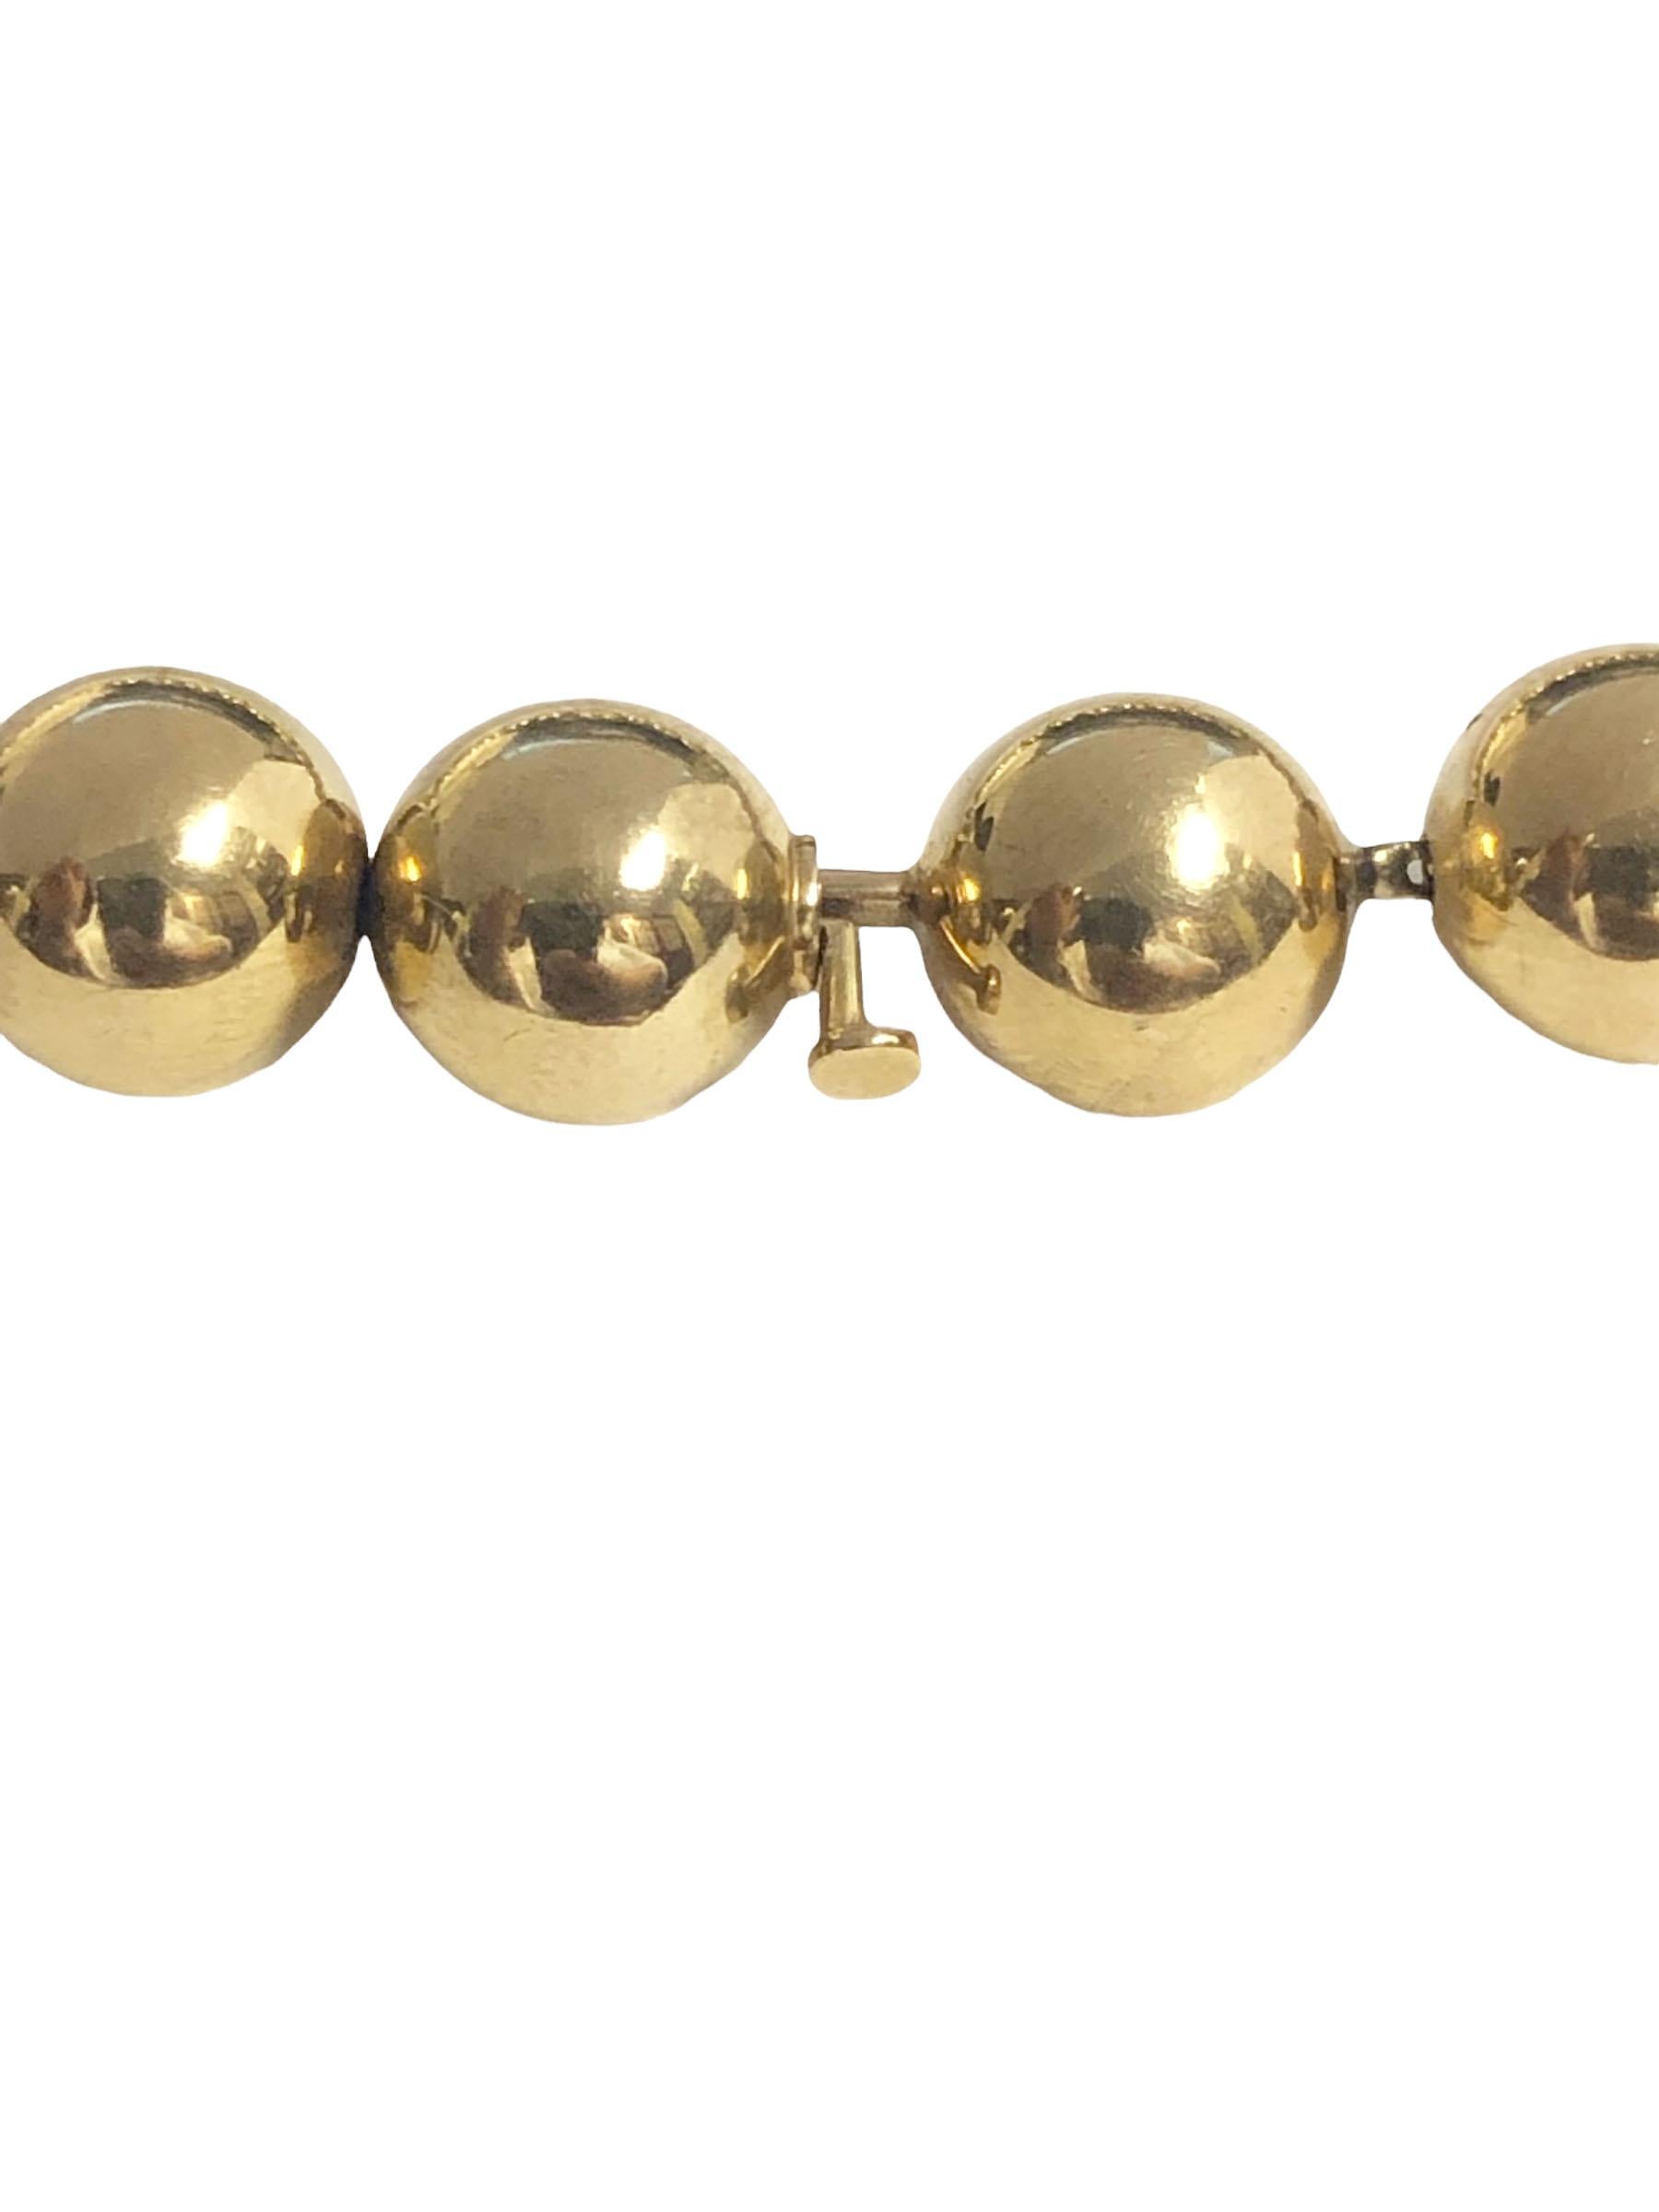 Circa 1980 Tiffany & Company 14K Yellow Gold Graduated Bead Necklace, measuring 16 inches in length and comprised of Hallow Beads measuring 16 M.M. to 9 M.M. Comes in a Tiffany Presentation box.